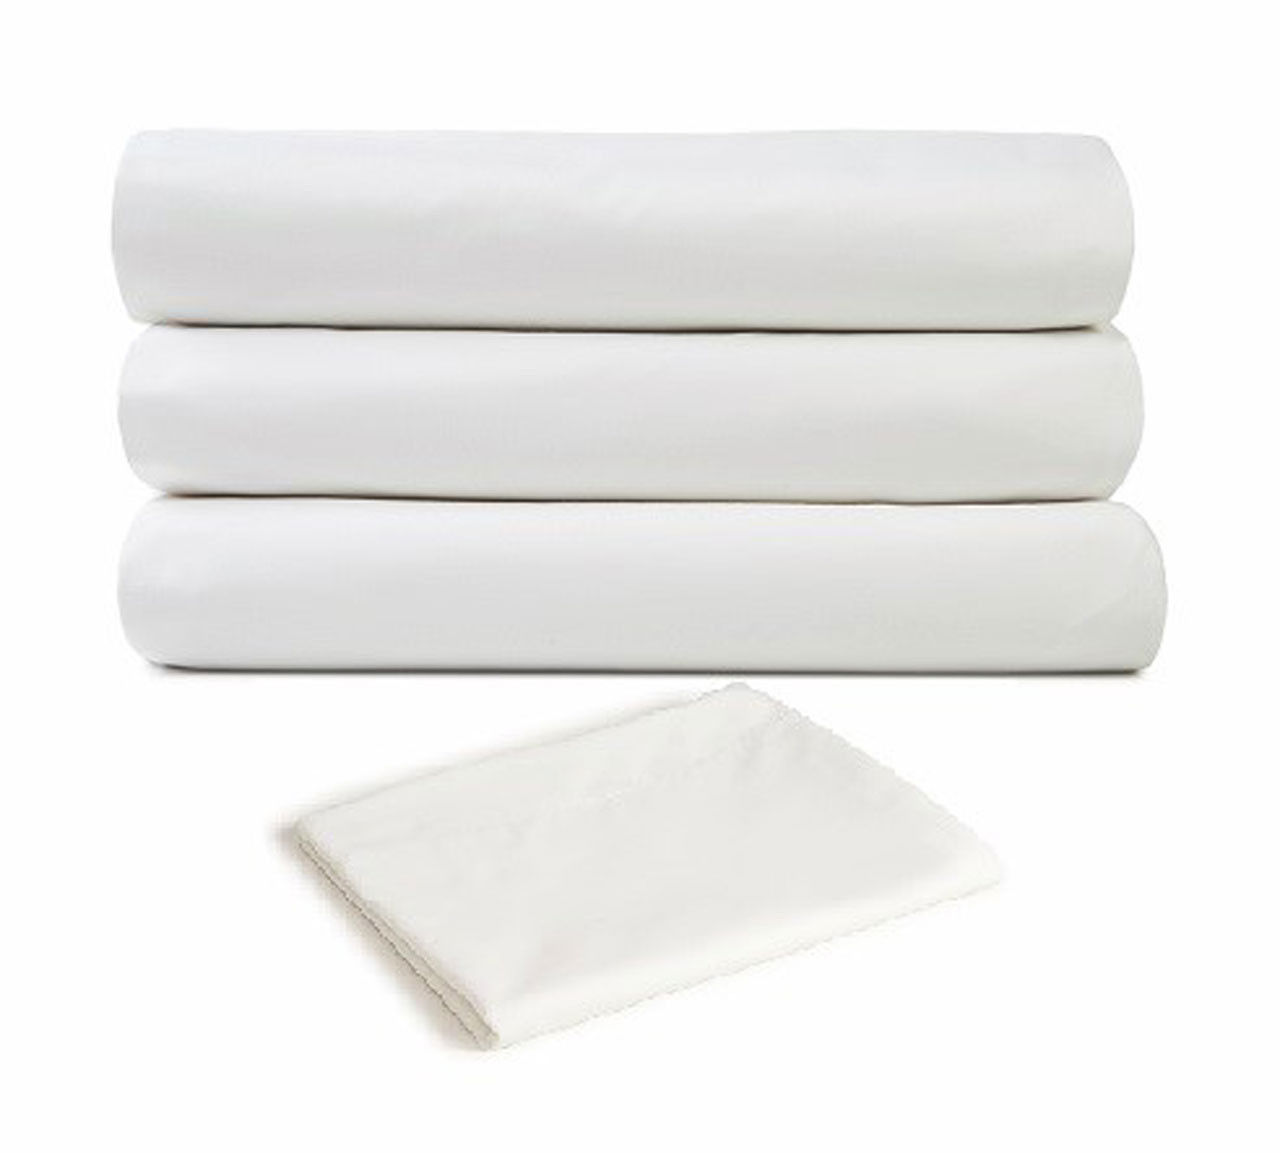 How well do the cotton poly T310 Premium Bed Sheets perform in terms of quality?